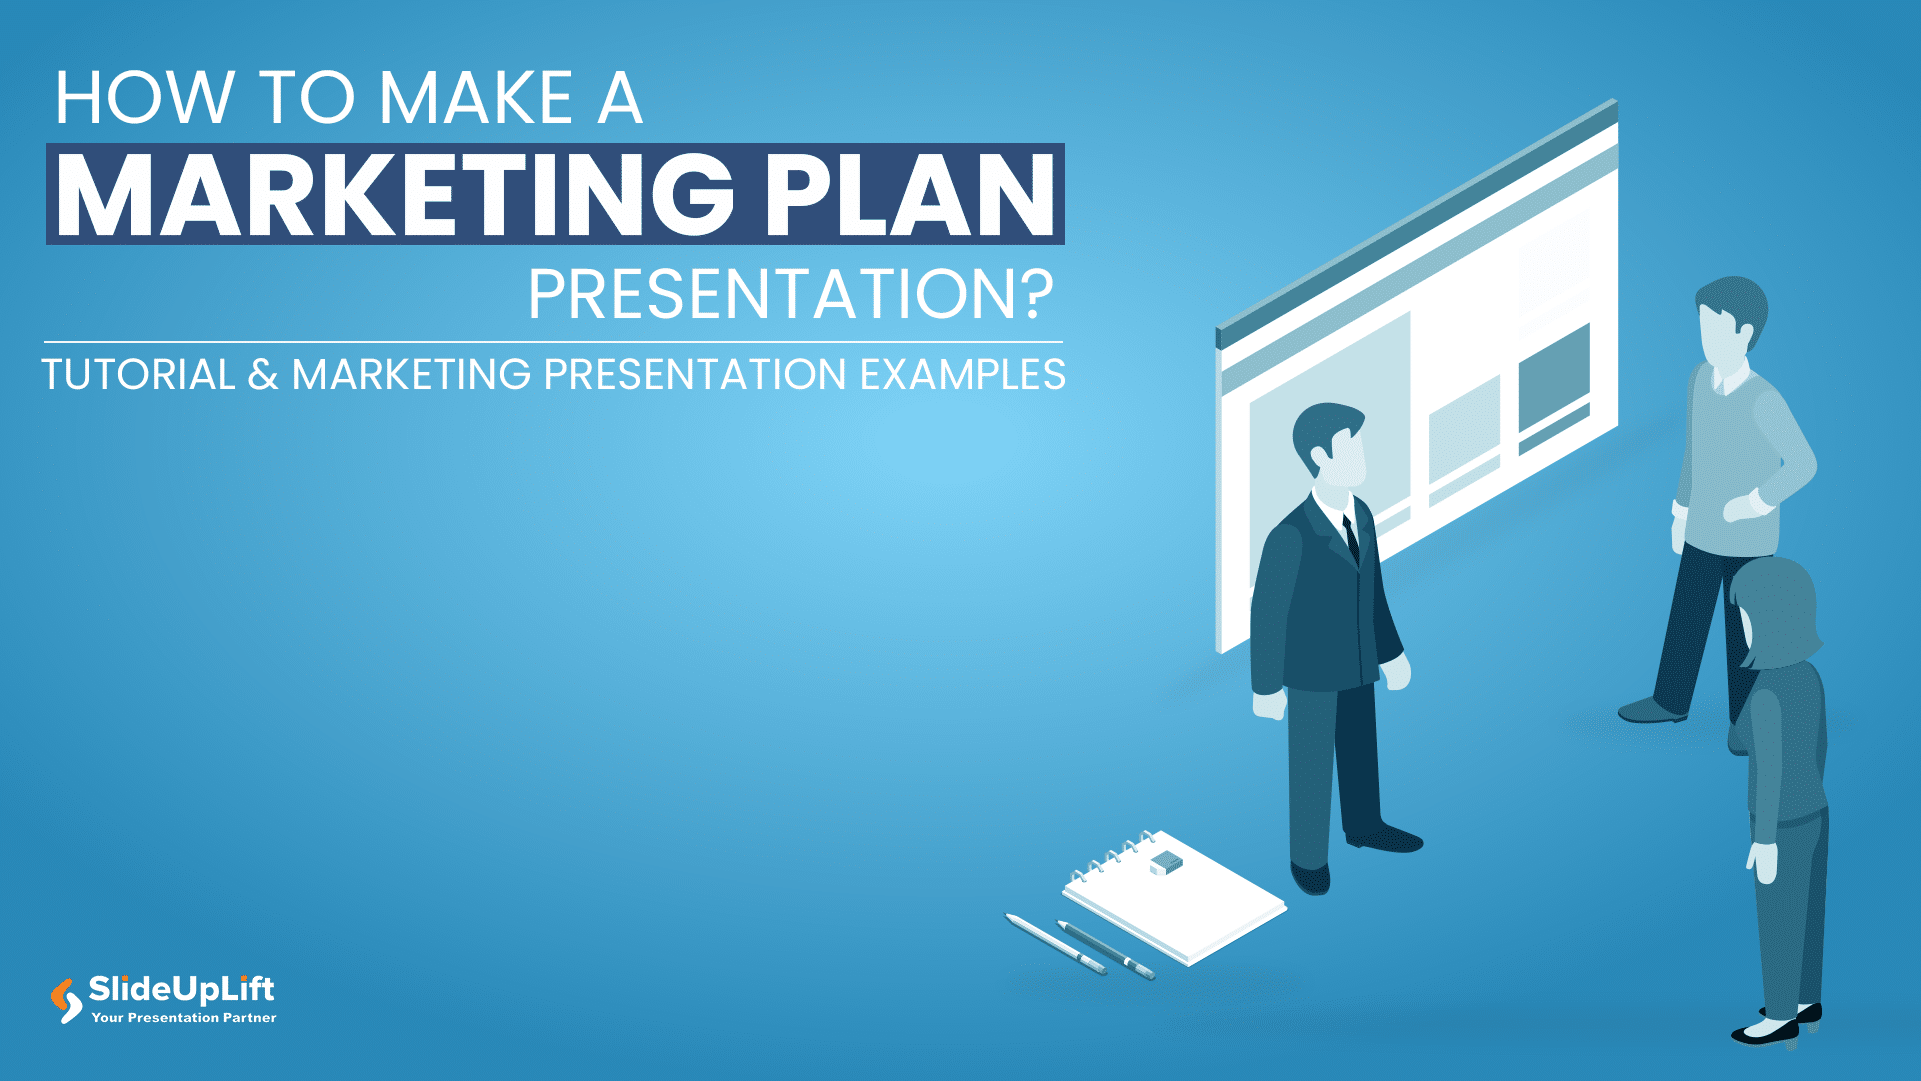 when presenting a business plan it is important to